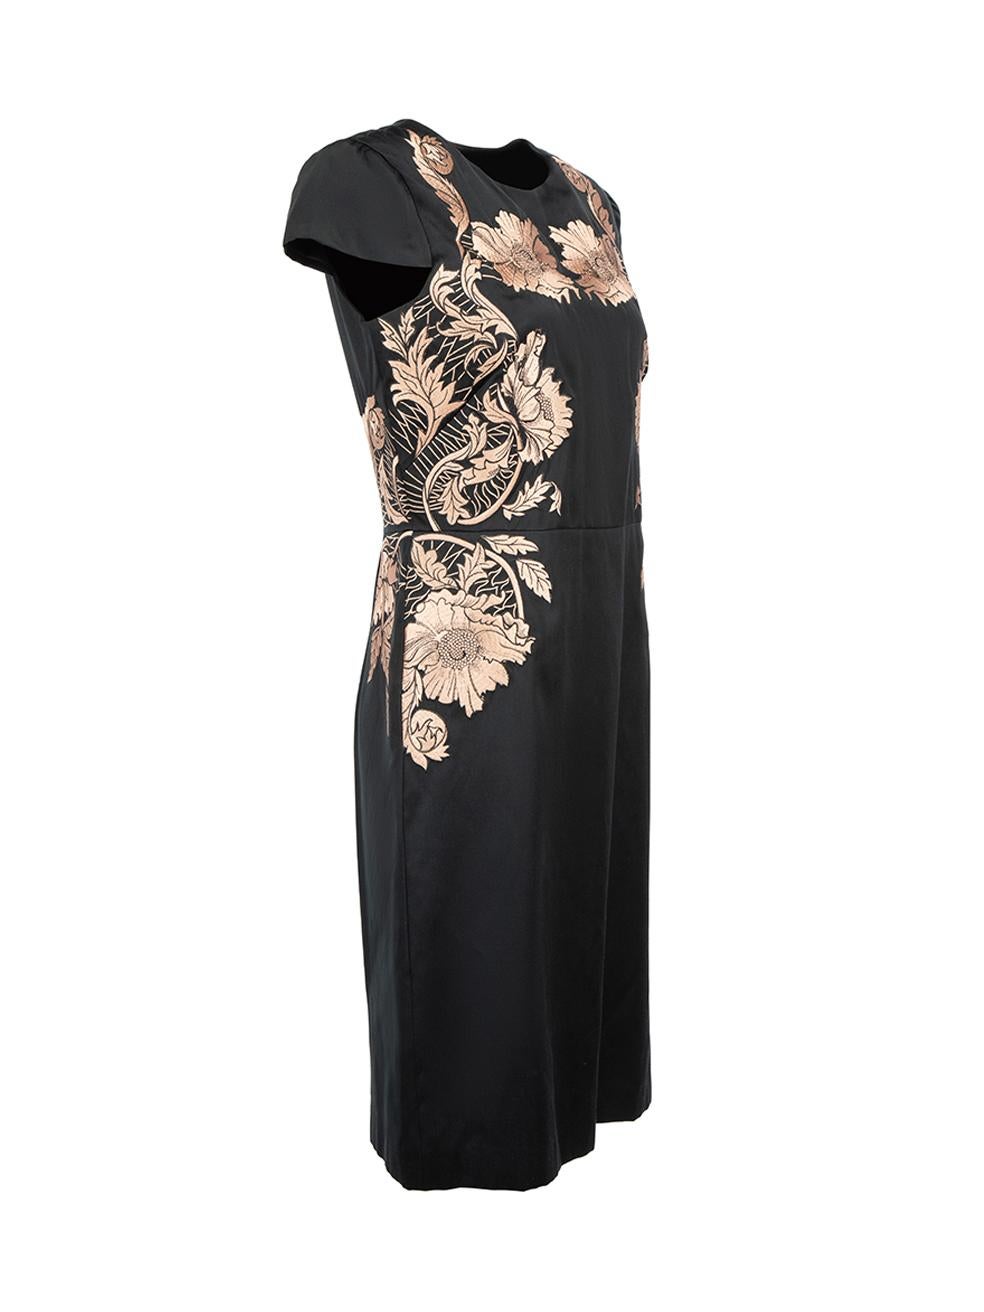 CONDITION is Good. Minor wear to dress is evident. Light wear to fabric and embroidery thread at centre front on this used Temperley designer resale item.



Details


Black

Viscose

Knee-length dress

Short cap sleeves

Round neckline

Figure